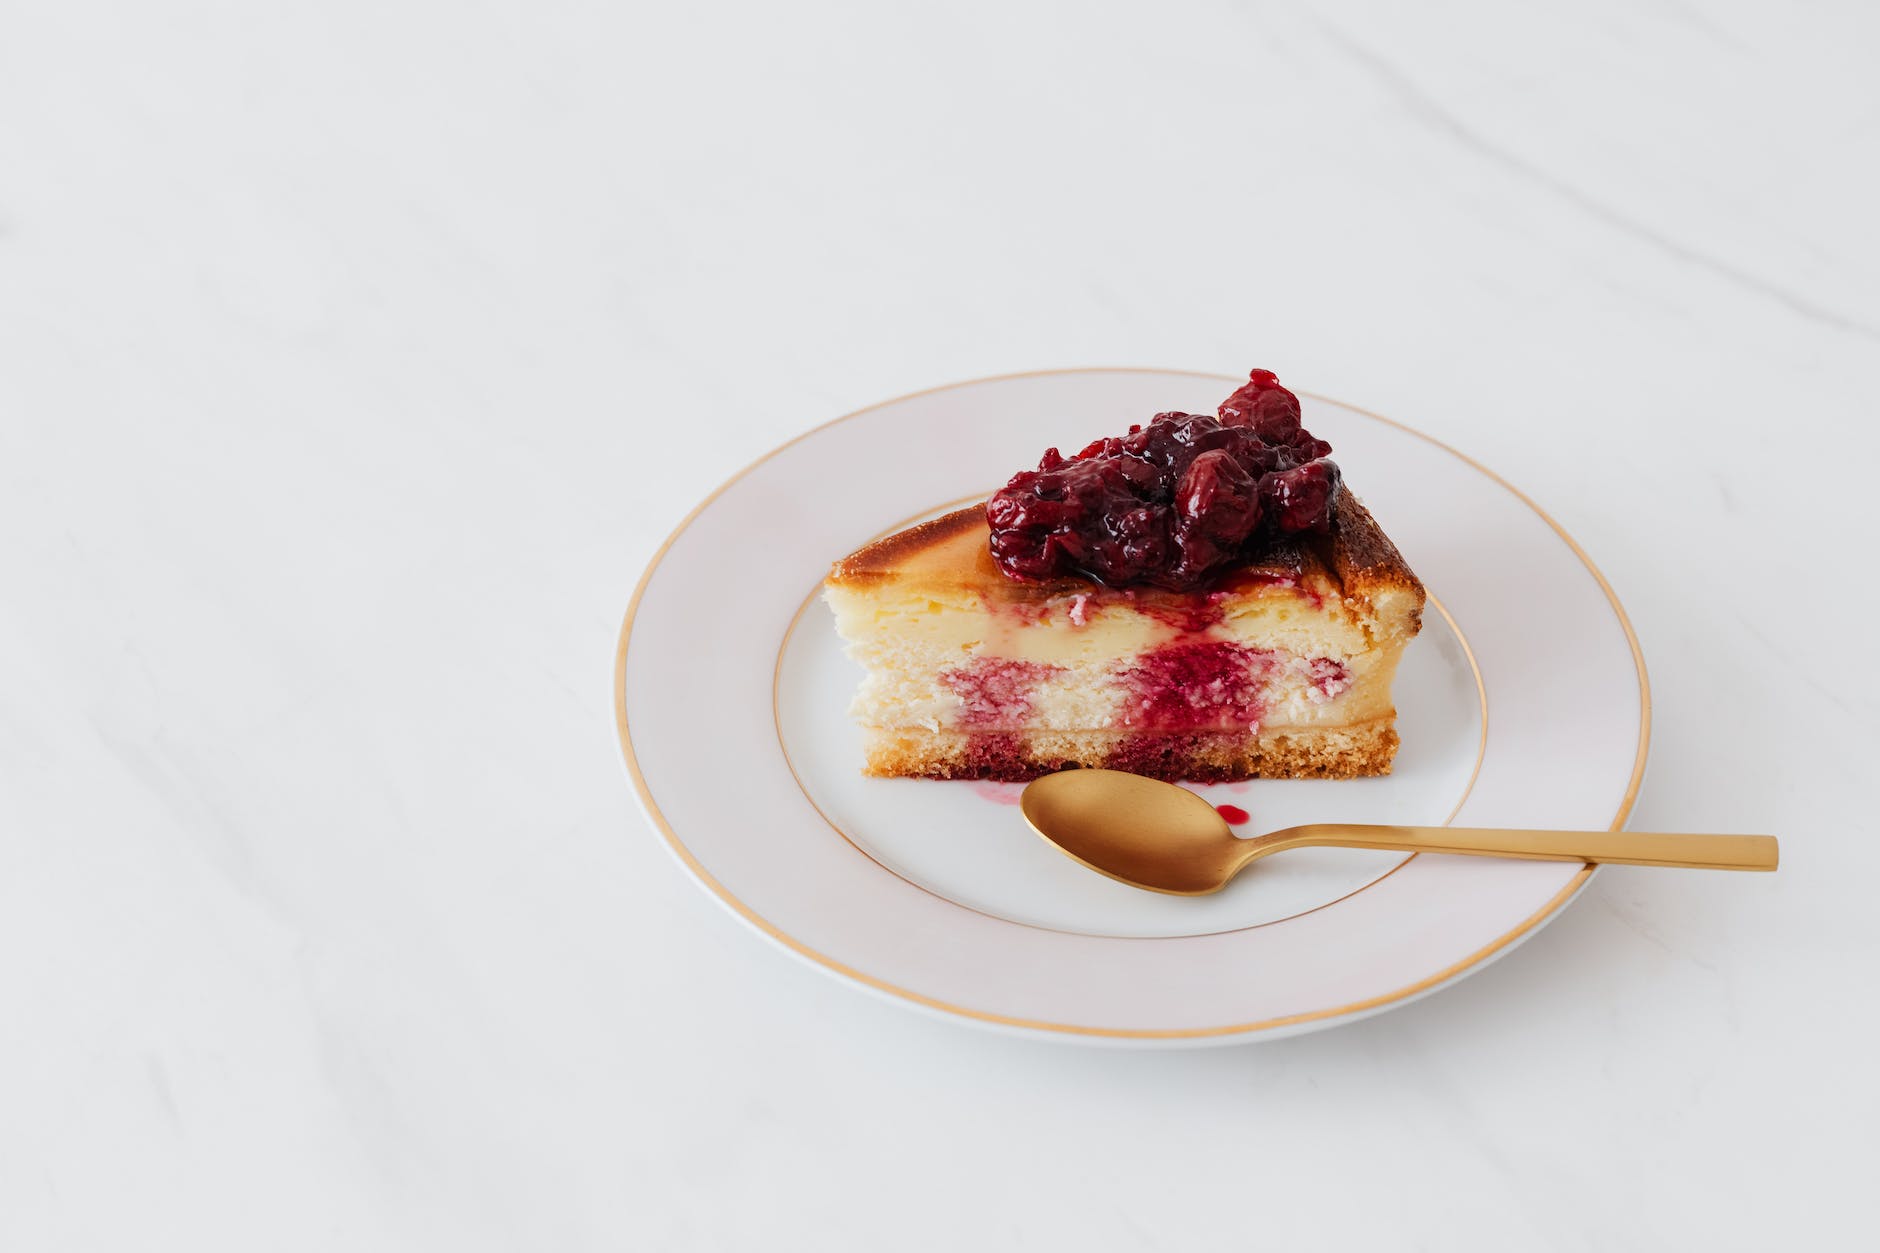 piece of cheesecake on plate served with spoon